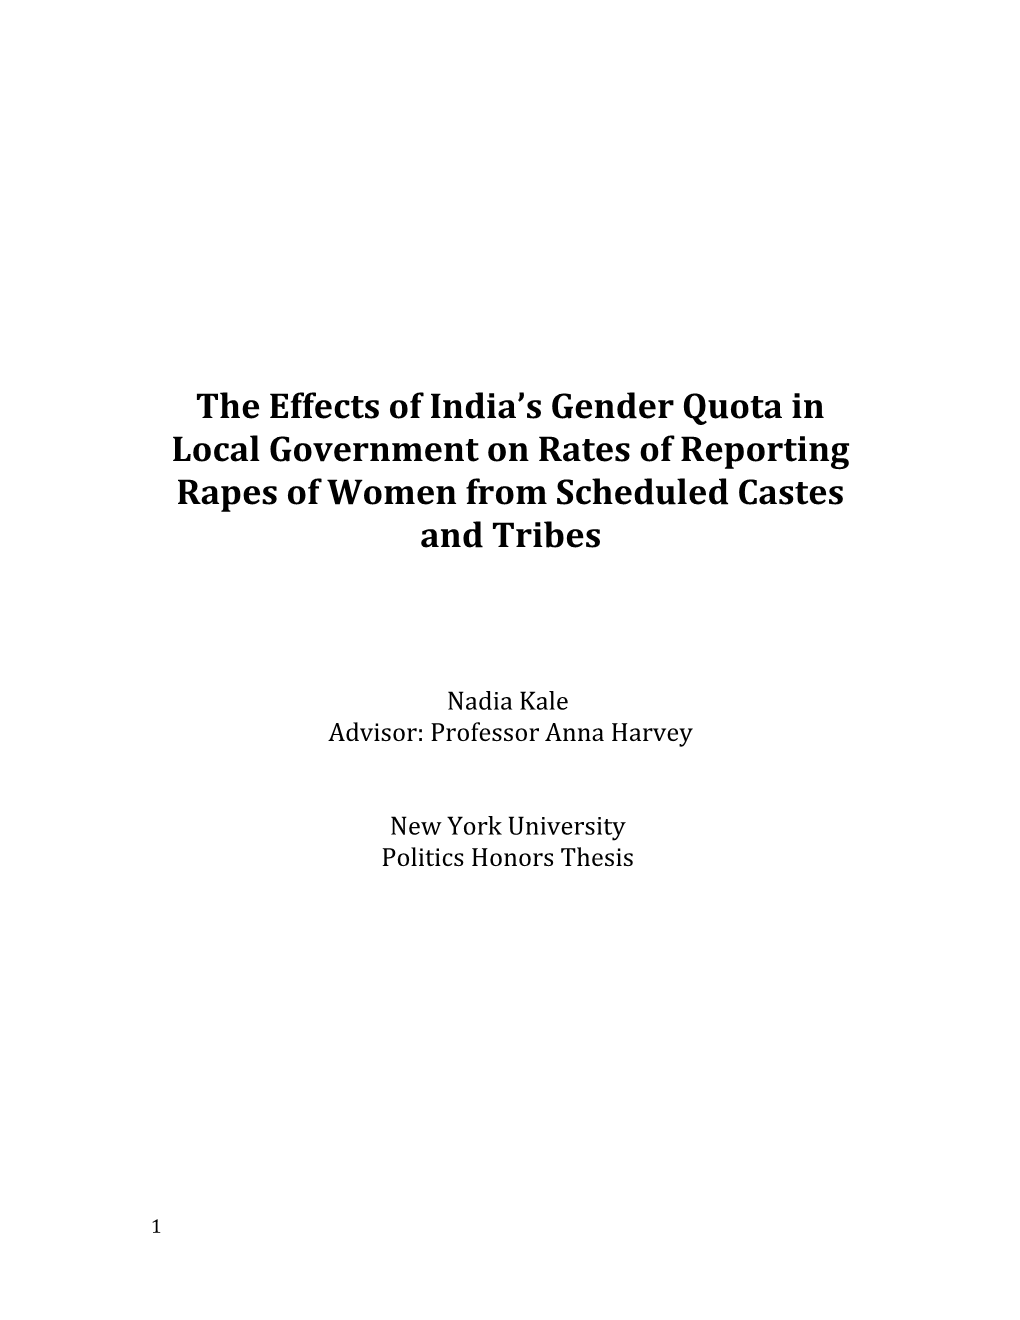 The Effects of India S Gender Quota in Local Government on Rates of Reporting Rapes Of